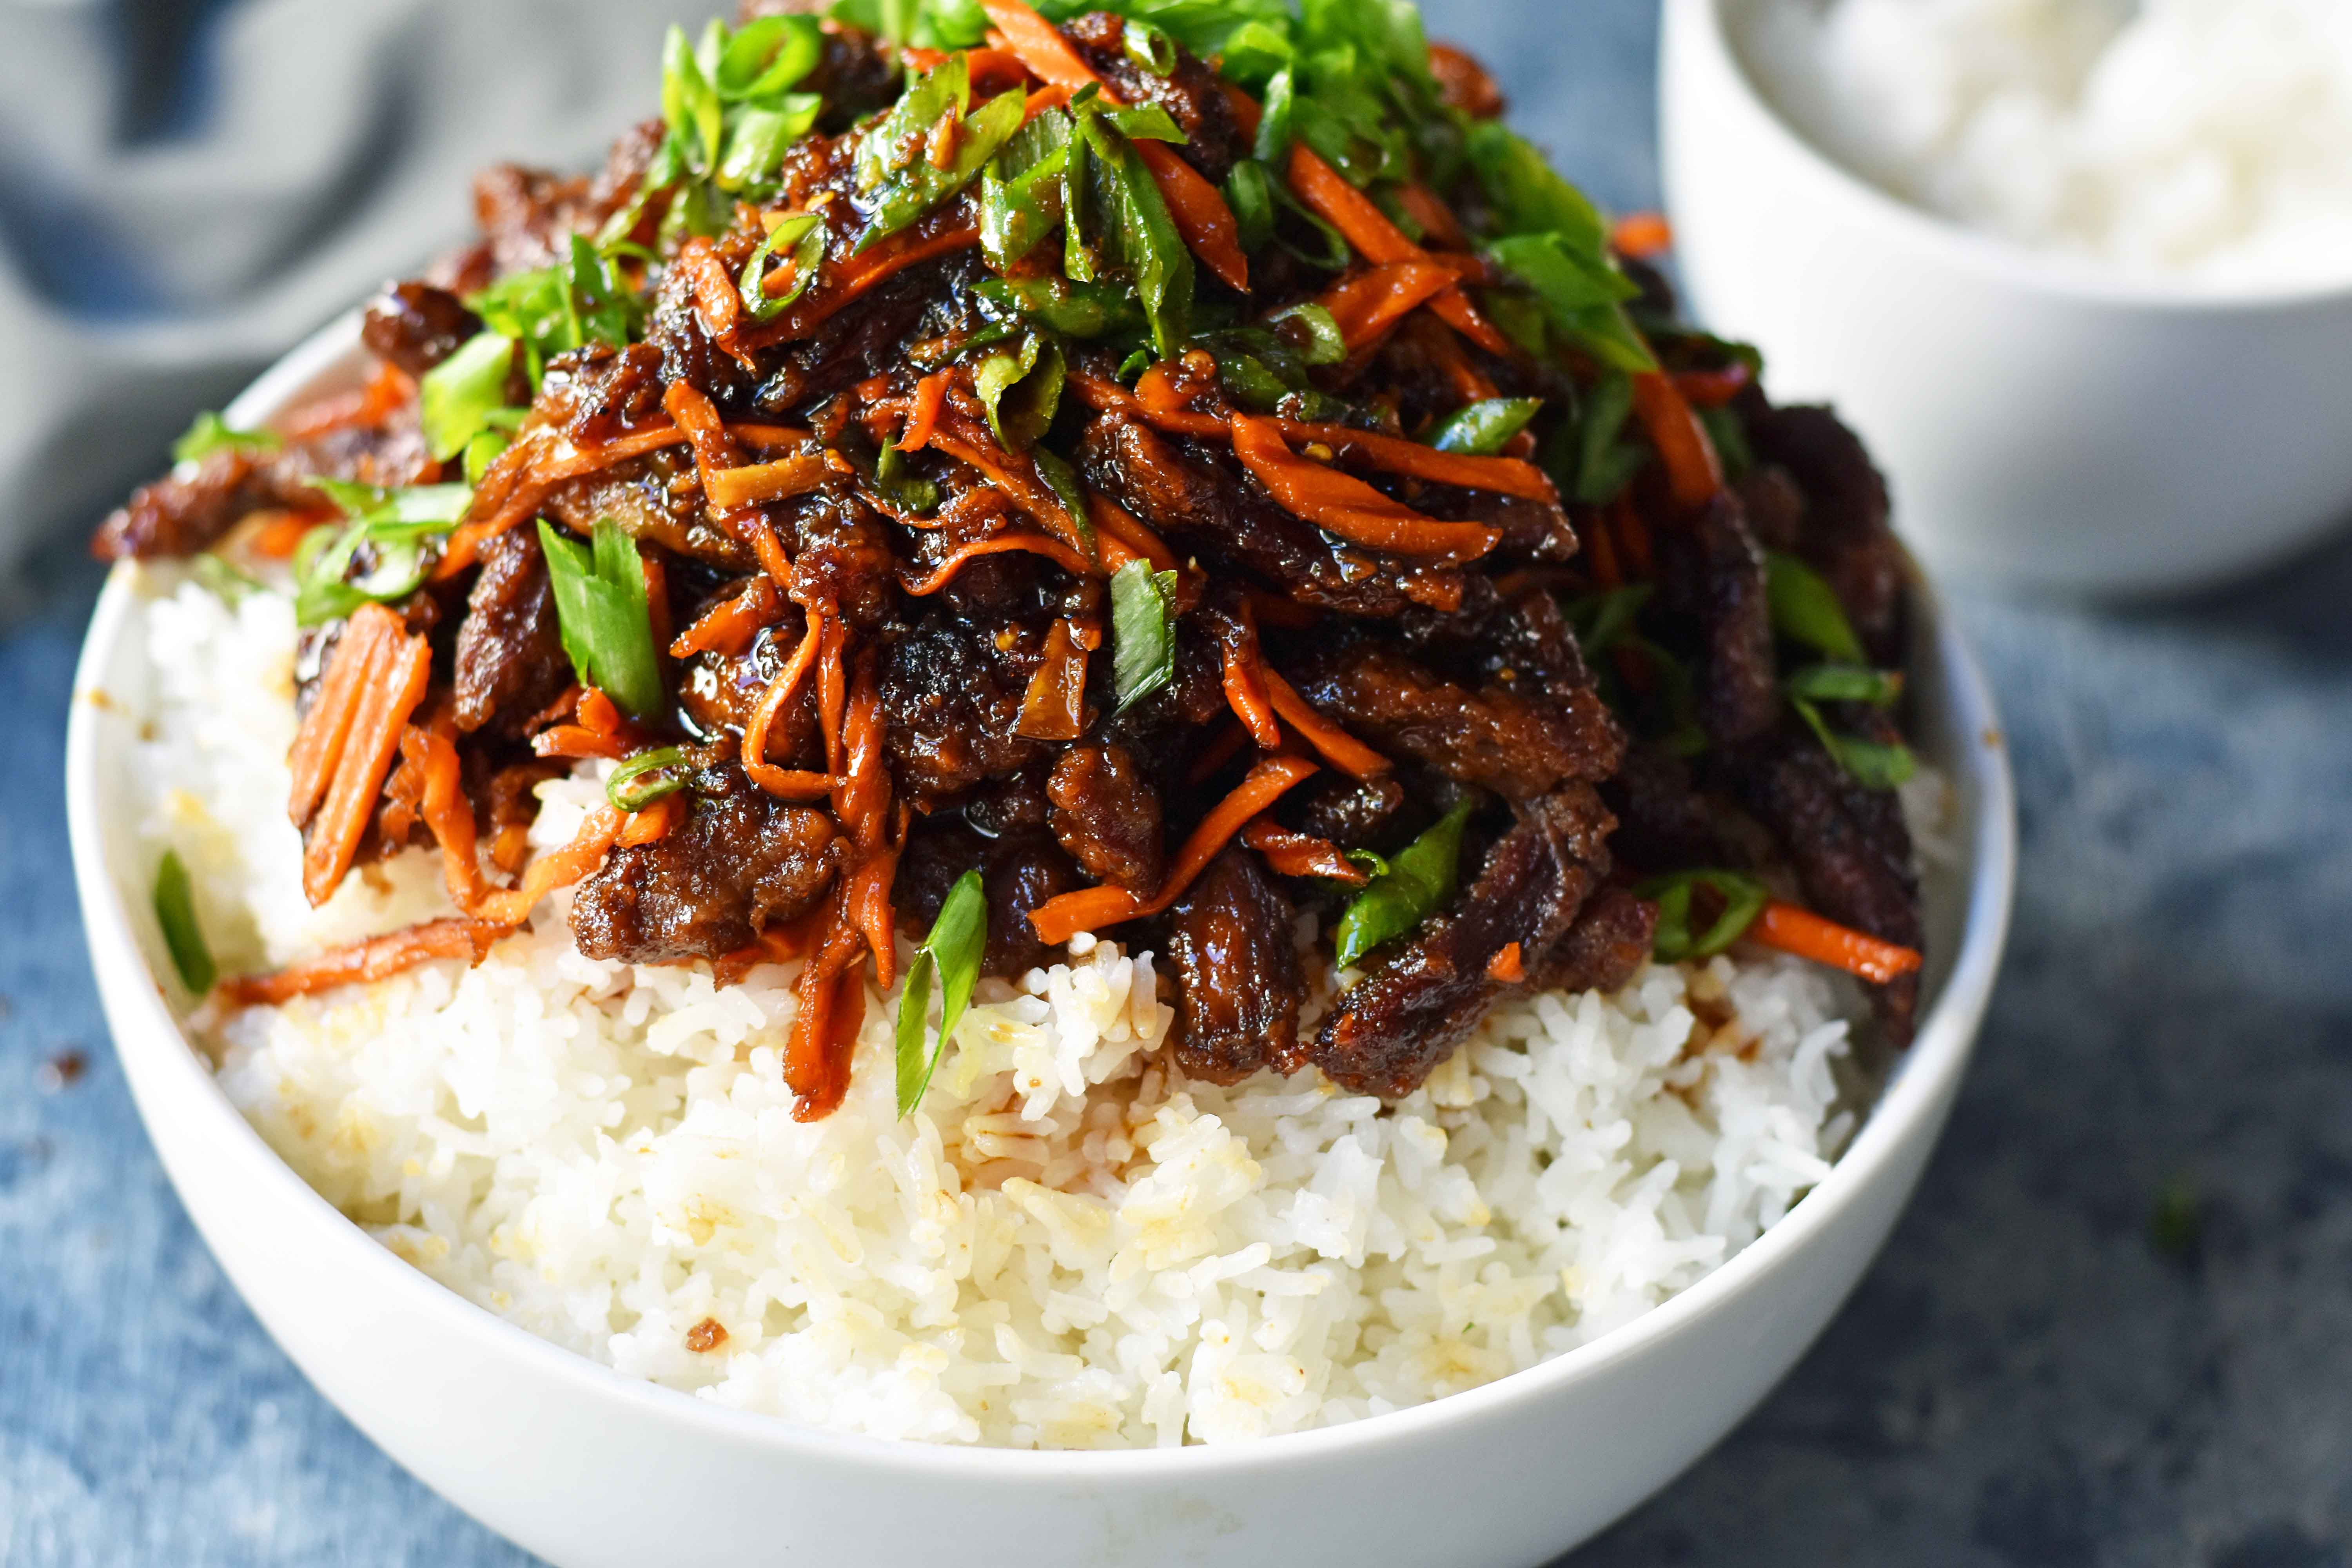 Mongolian Beef recipe. A P.F. Chang's Monglian Beef copycat recipe. Crispy beef in a sweet, salty, spicy sauce on a bed of rice. A popular asian dish. www.modernhoney.com